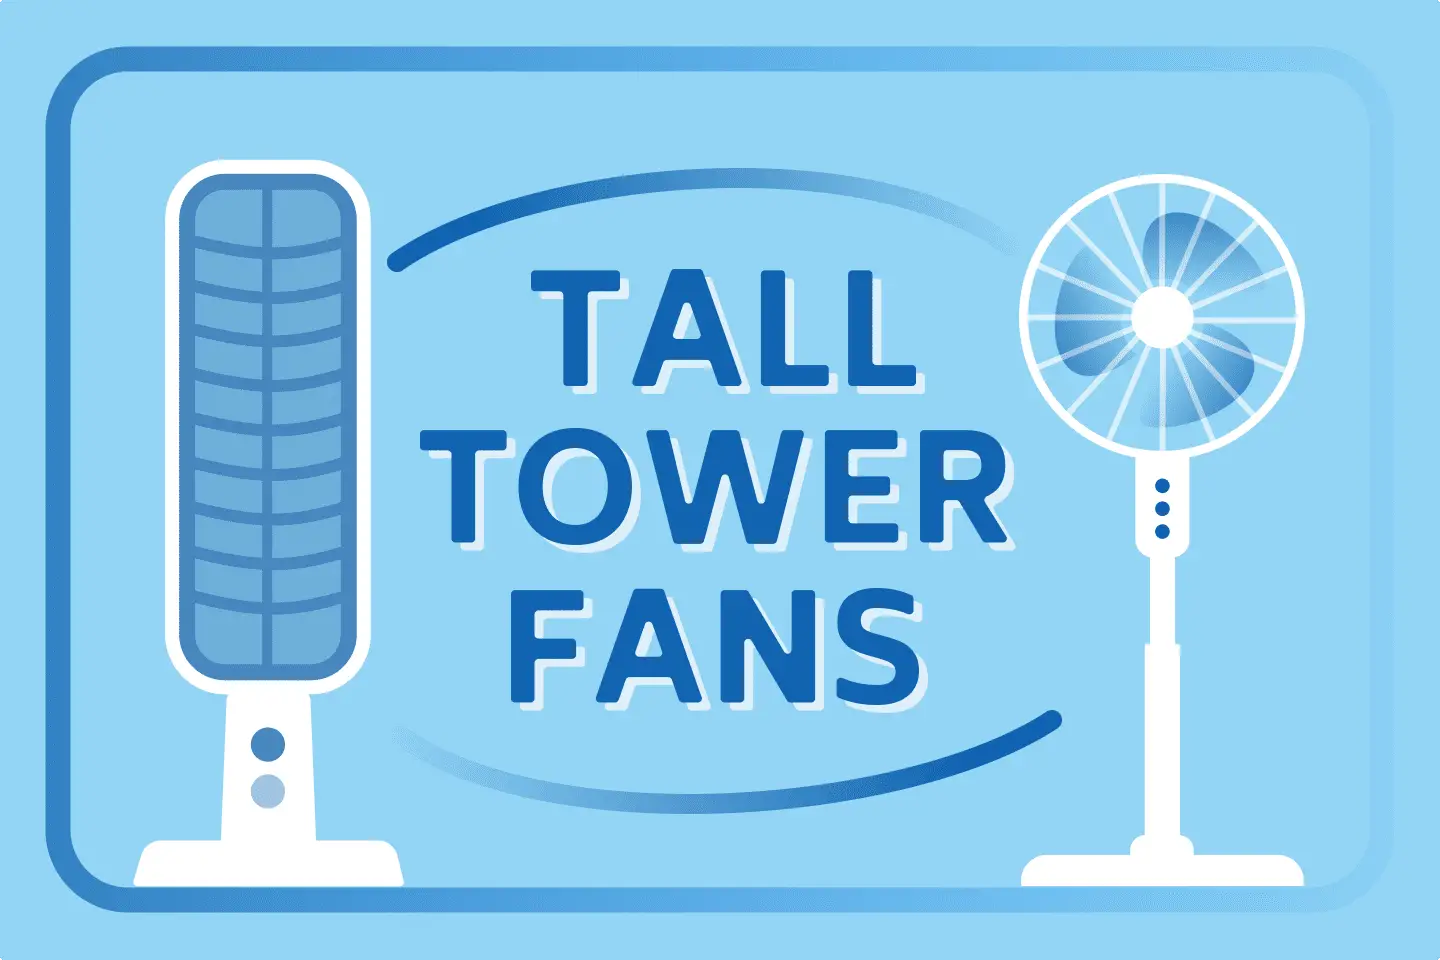 7 Best Tall Tower & Stand Fans